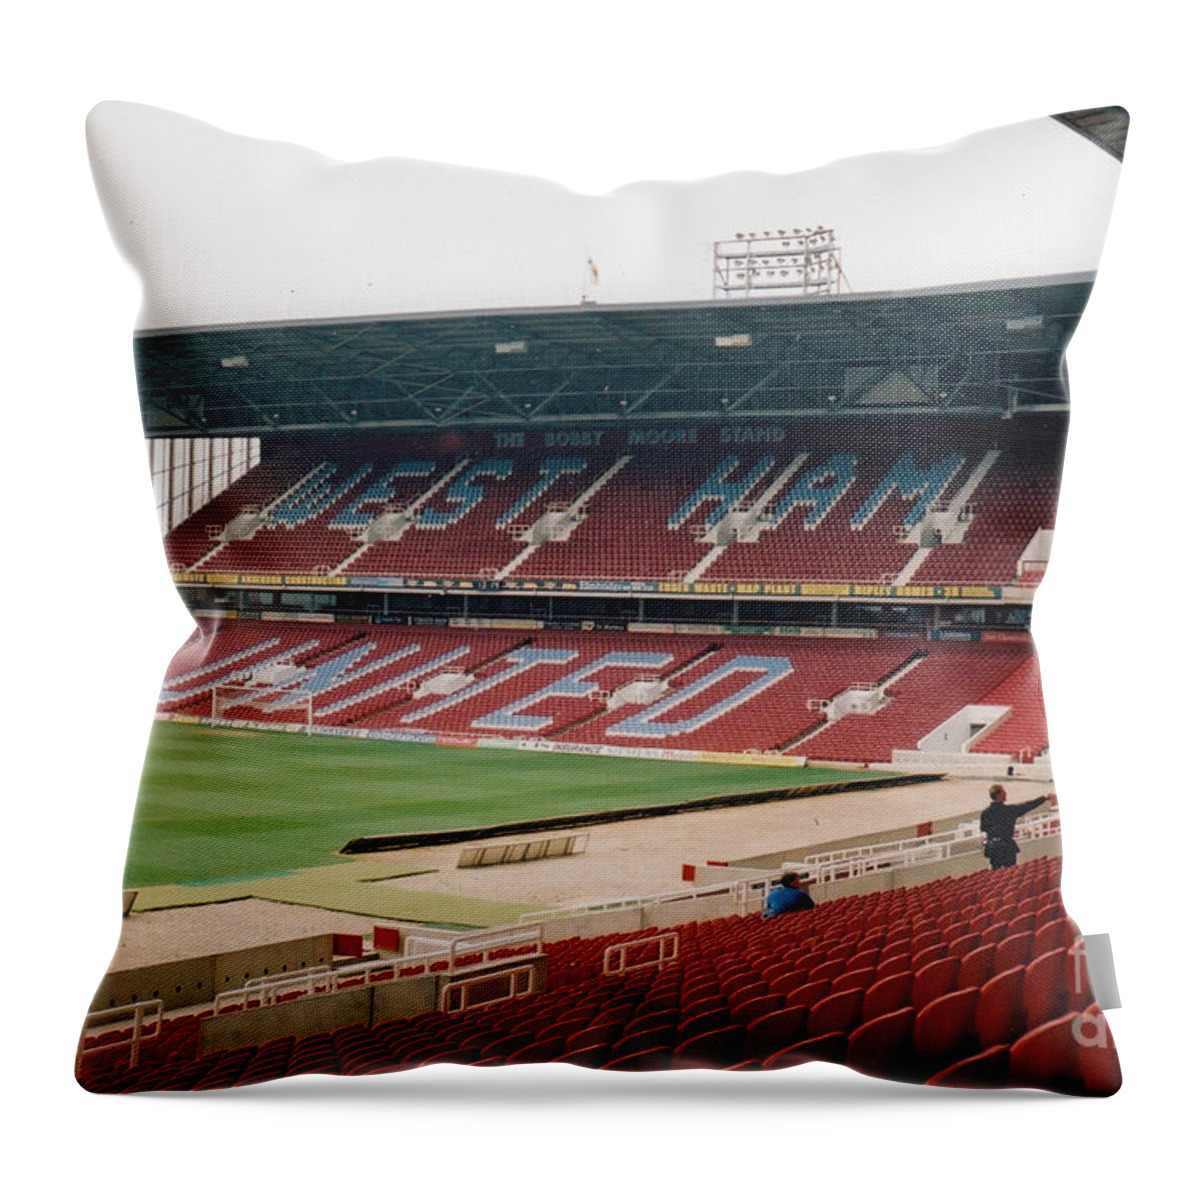 West Ham Throw Pillow featuring the photograph West Ham - Upton Park - South Stand 5 - March 2002 by Legendary Football Grounds